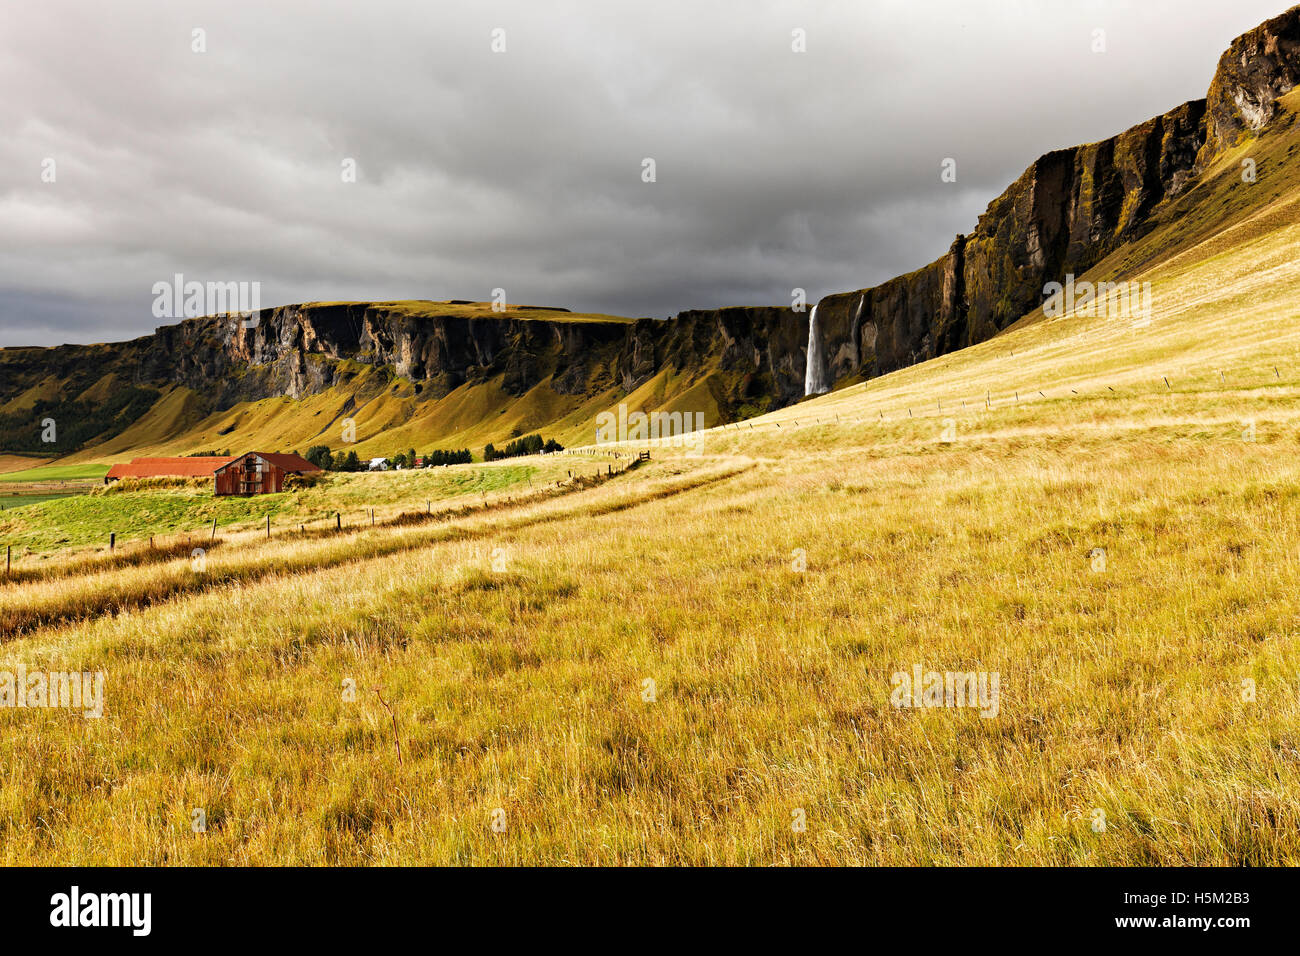 Farm Shed in mountain landscape (Dwarf Cliffs) with waterfall, South  East Iceland, North Atlantic, Europe Stock Photo